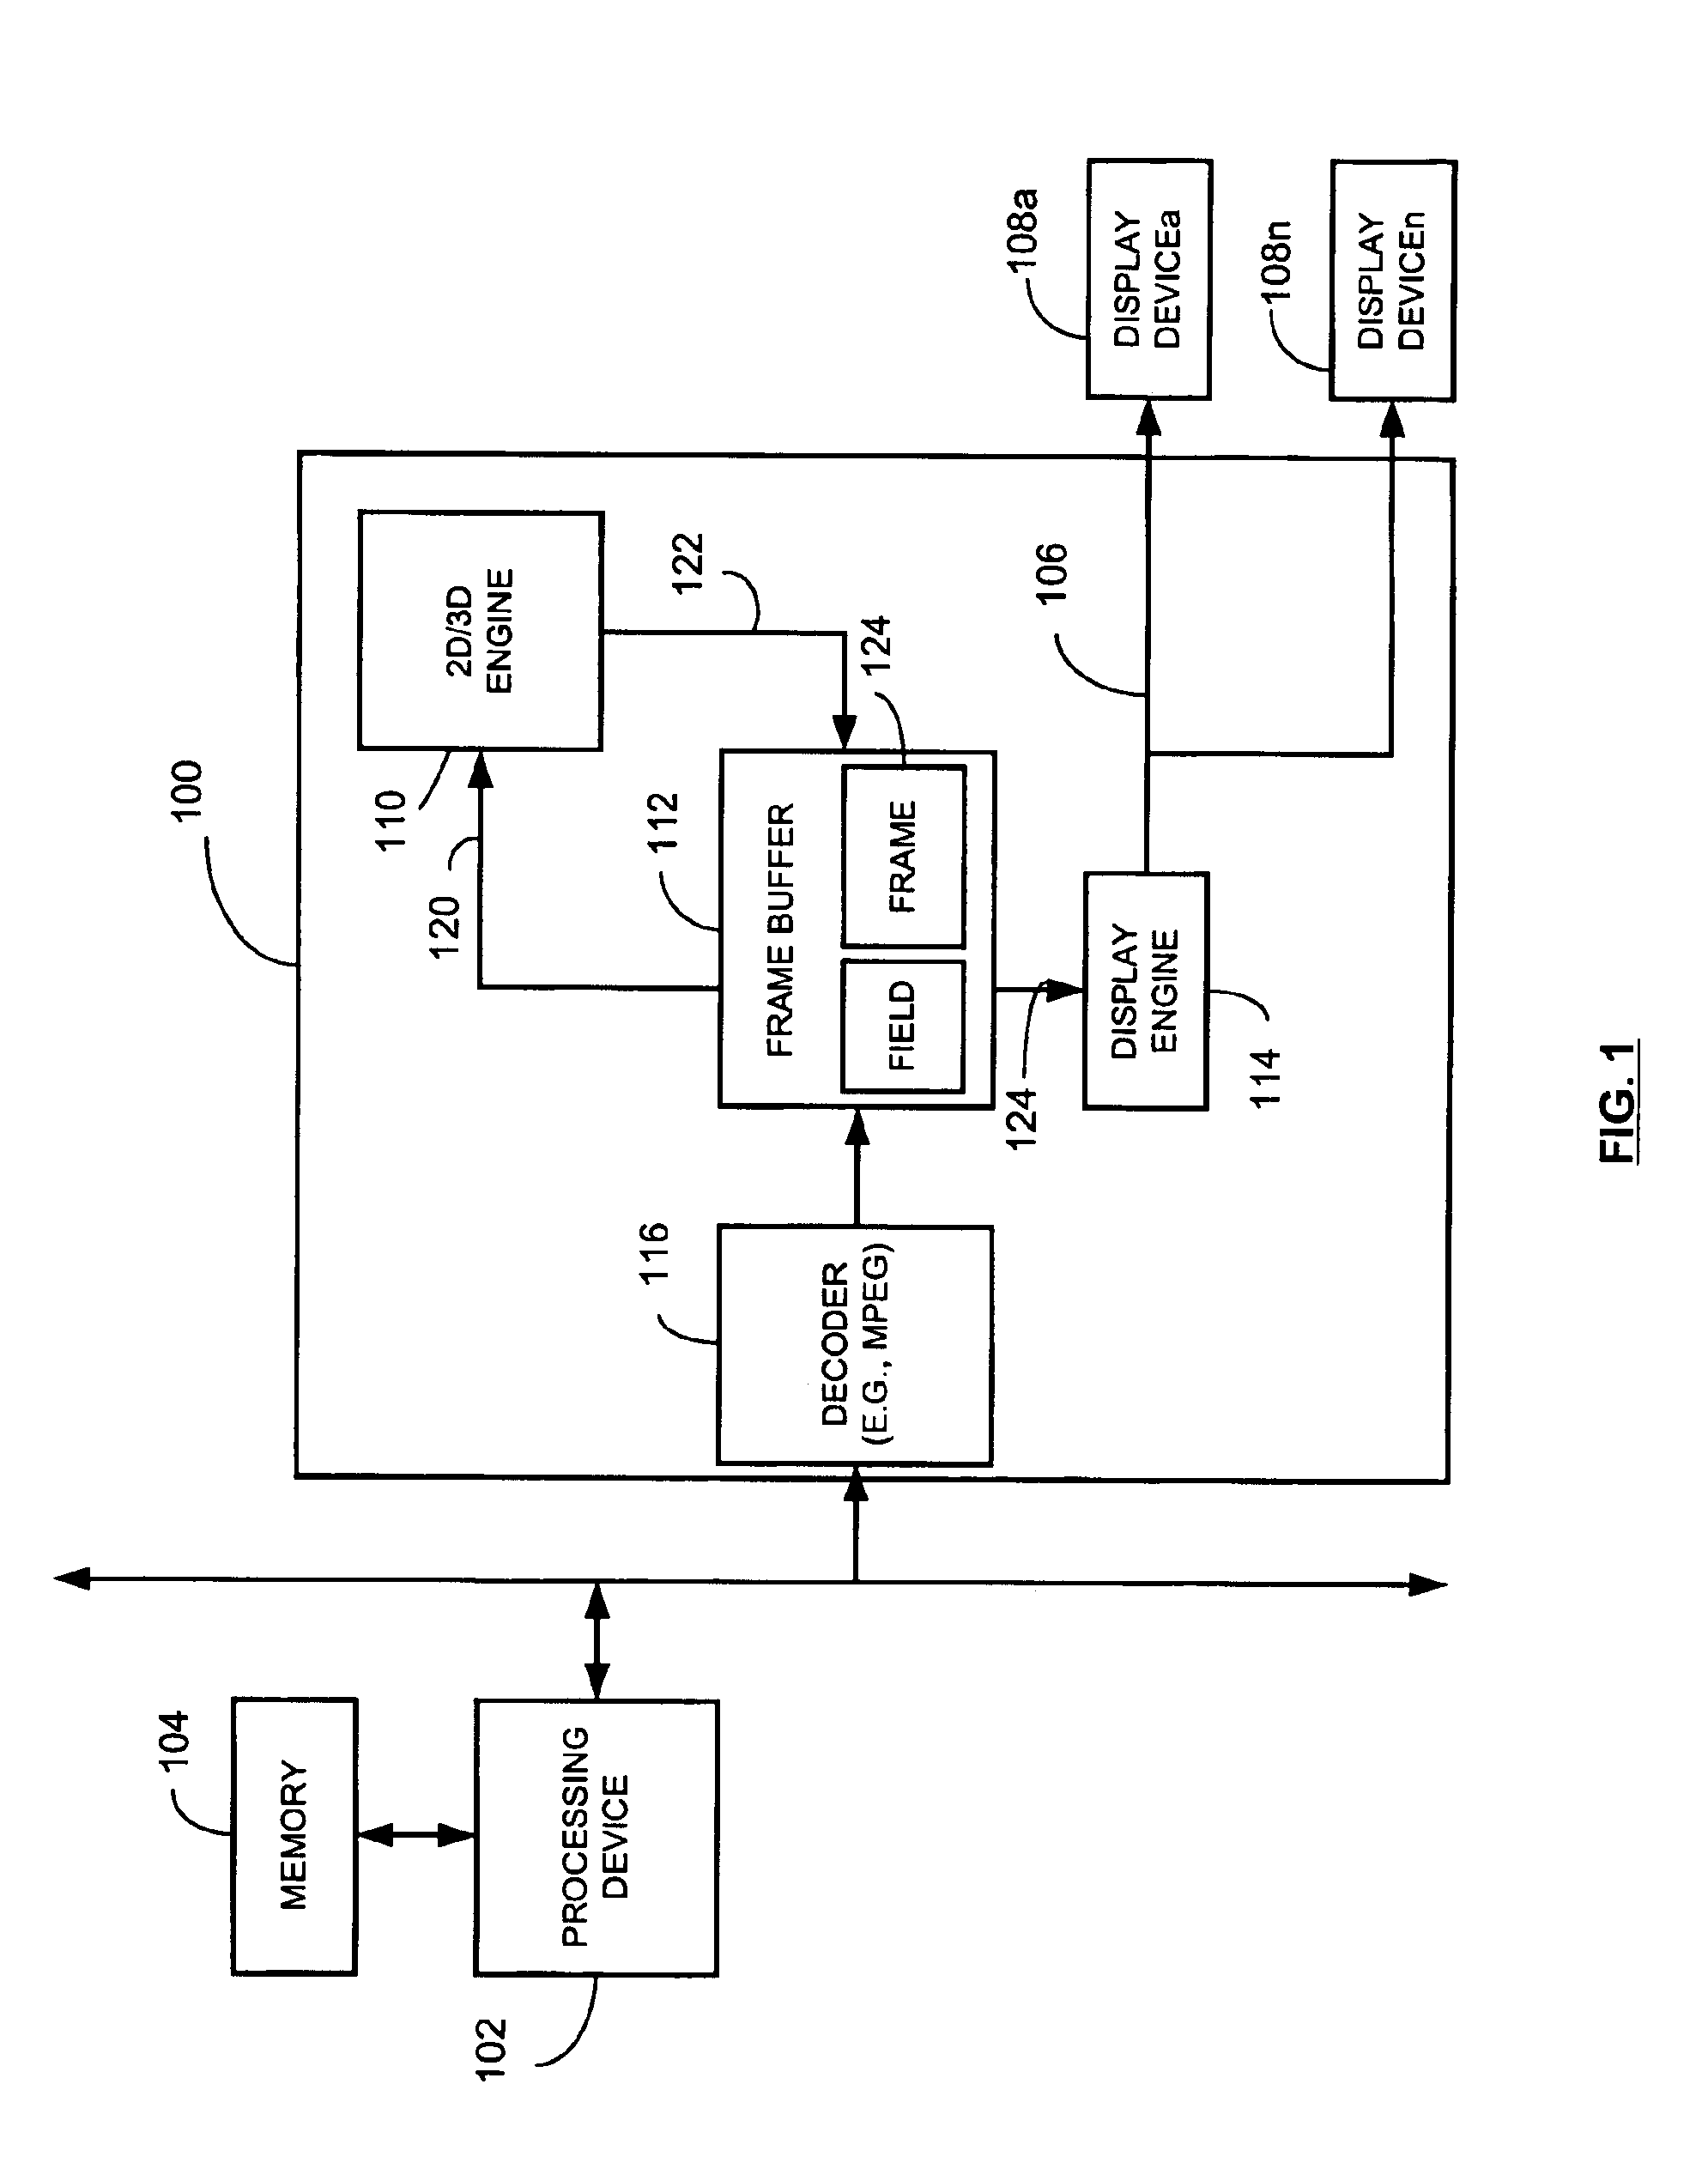 Method for deinterlacing interlaced video by a graphics processor